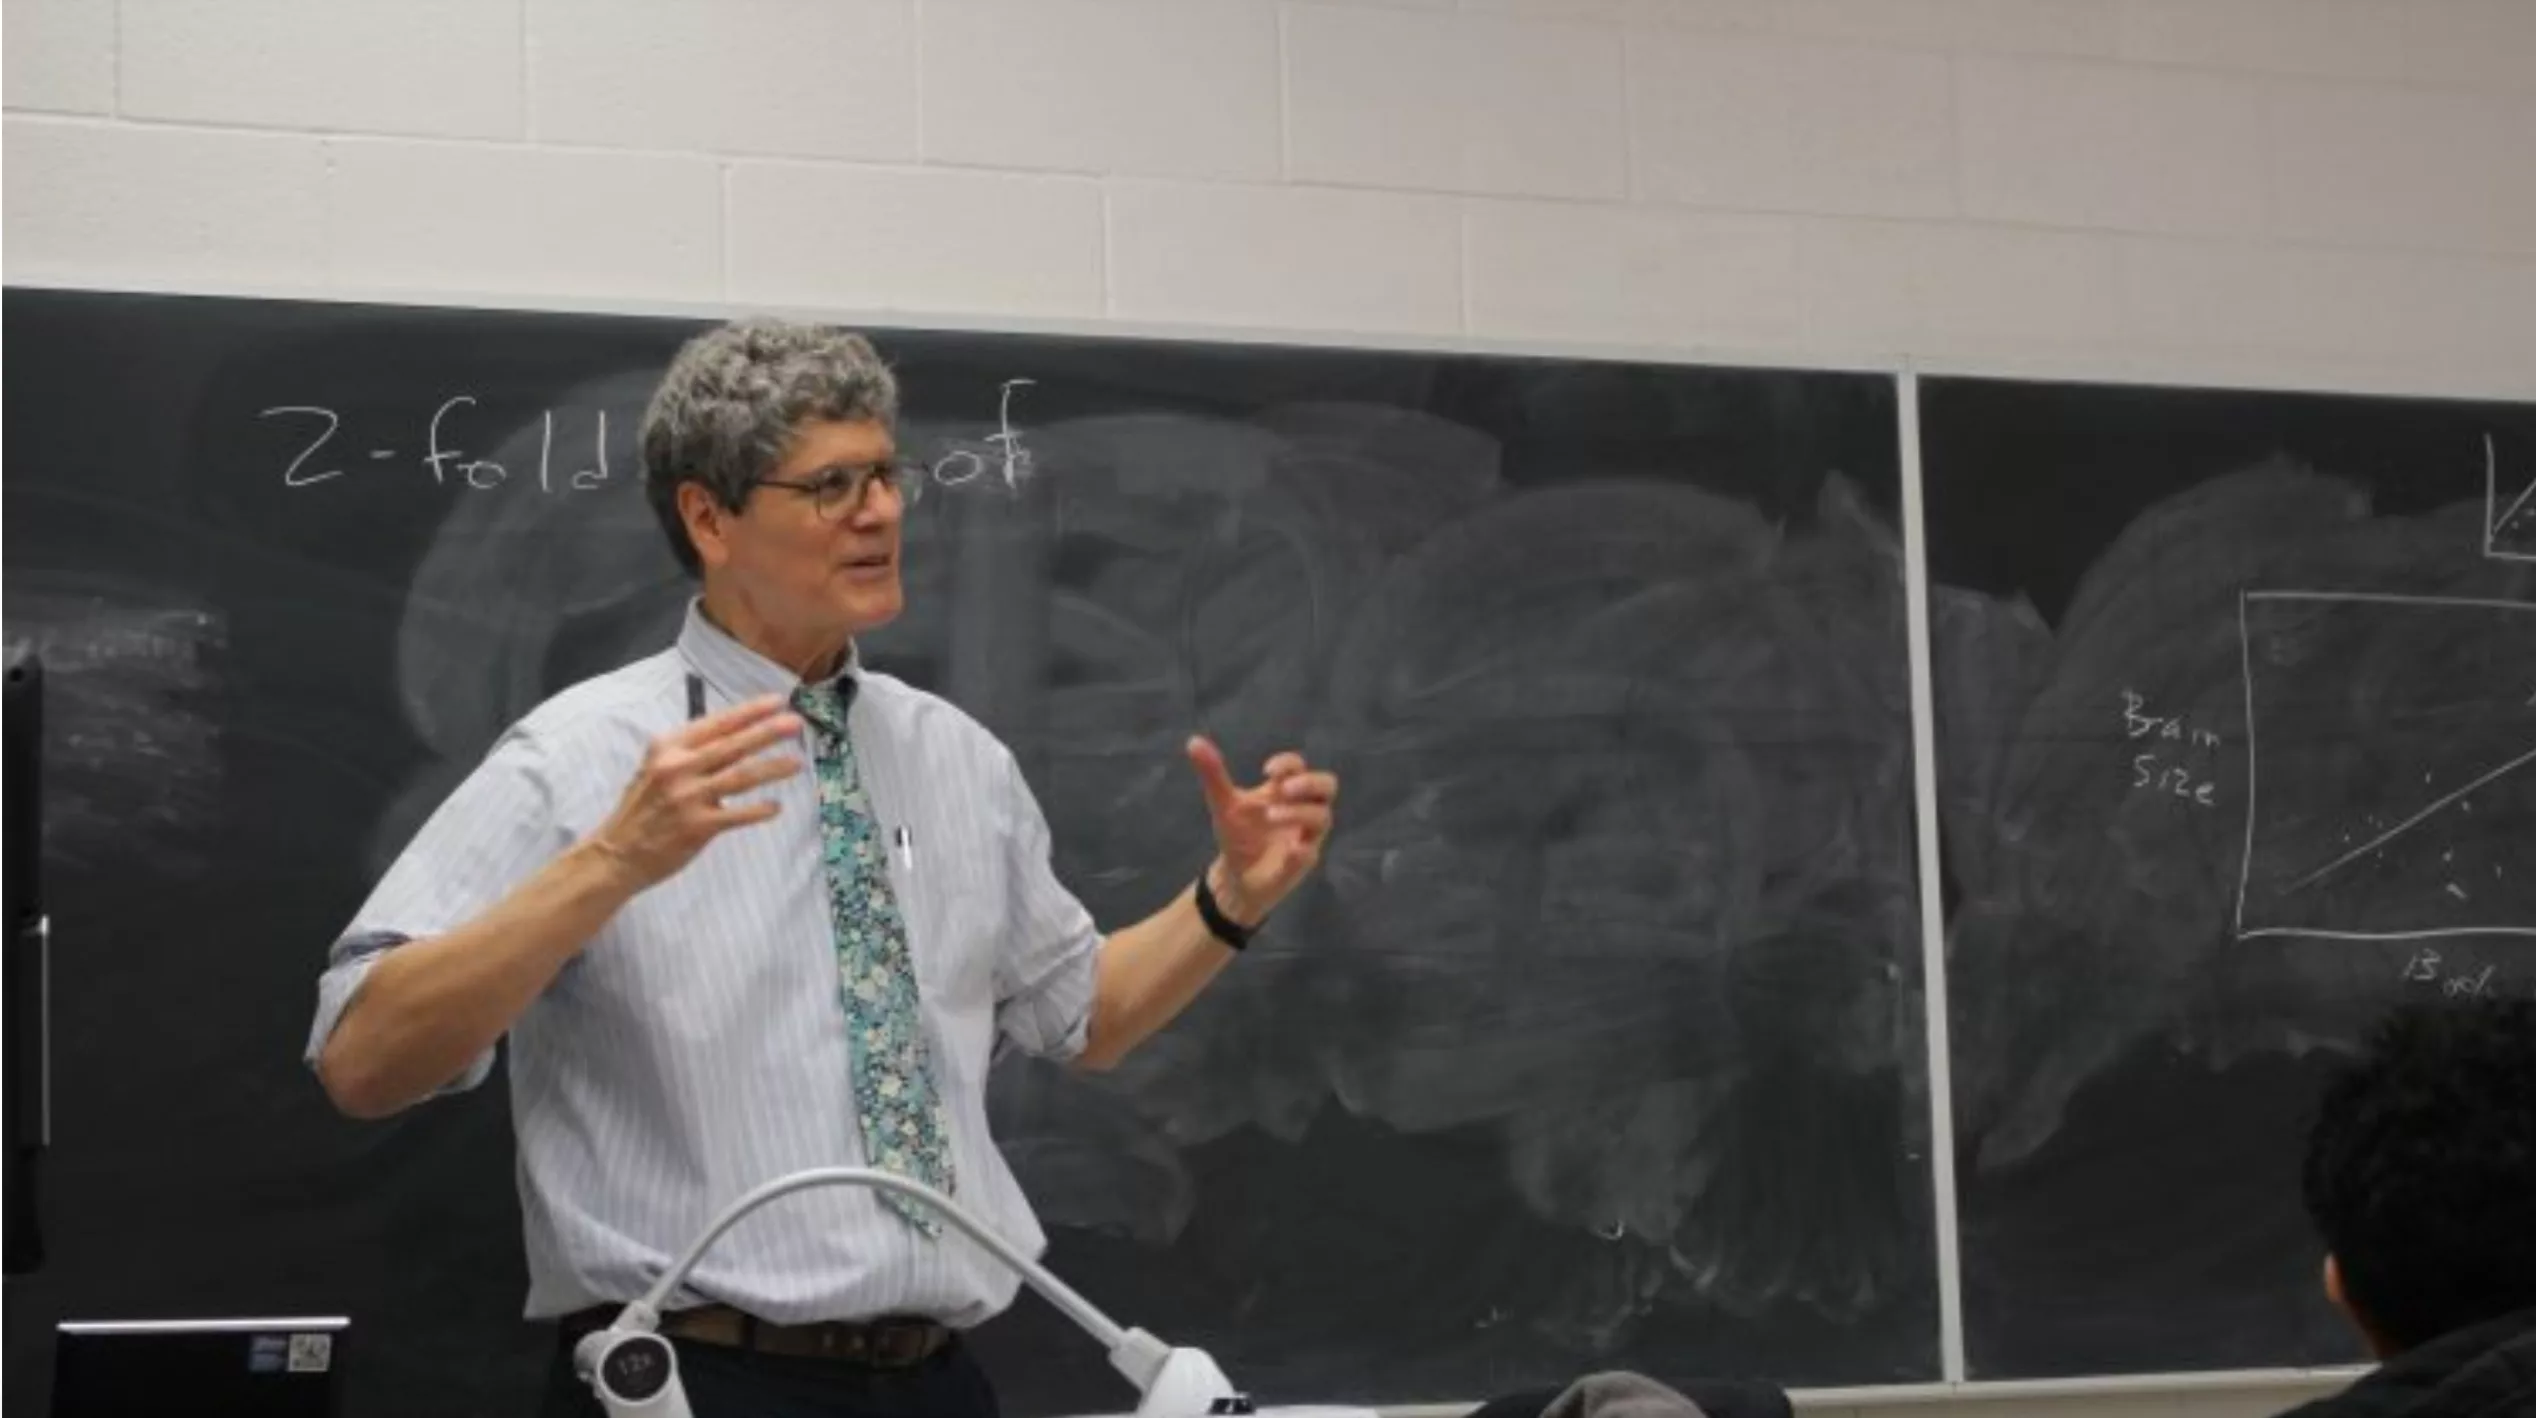 Biology Professor Duncan MacKenzie ‘71 Talks Sea Turtles, Fish, and Going With the Flow